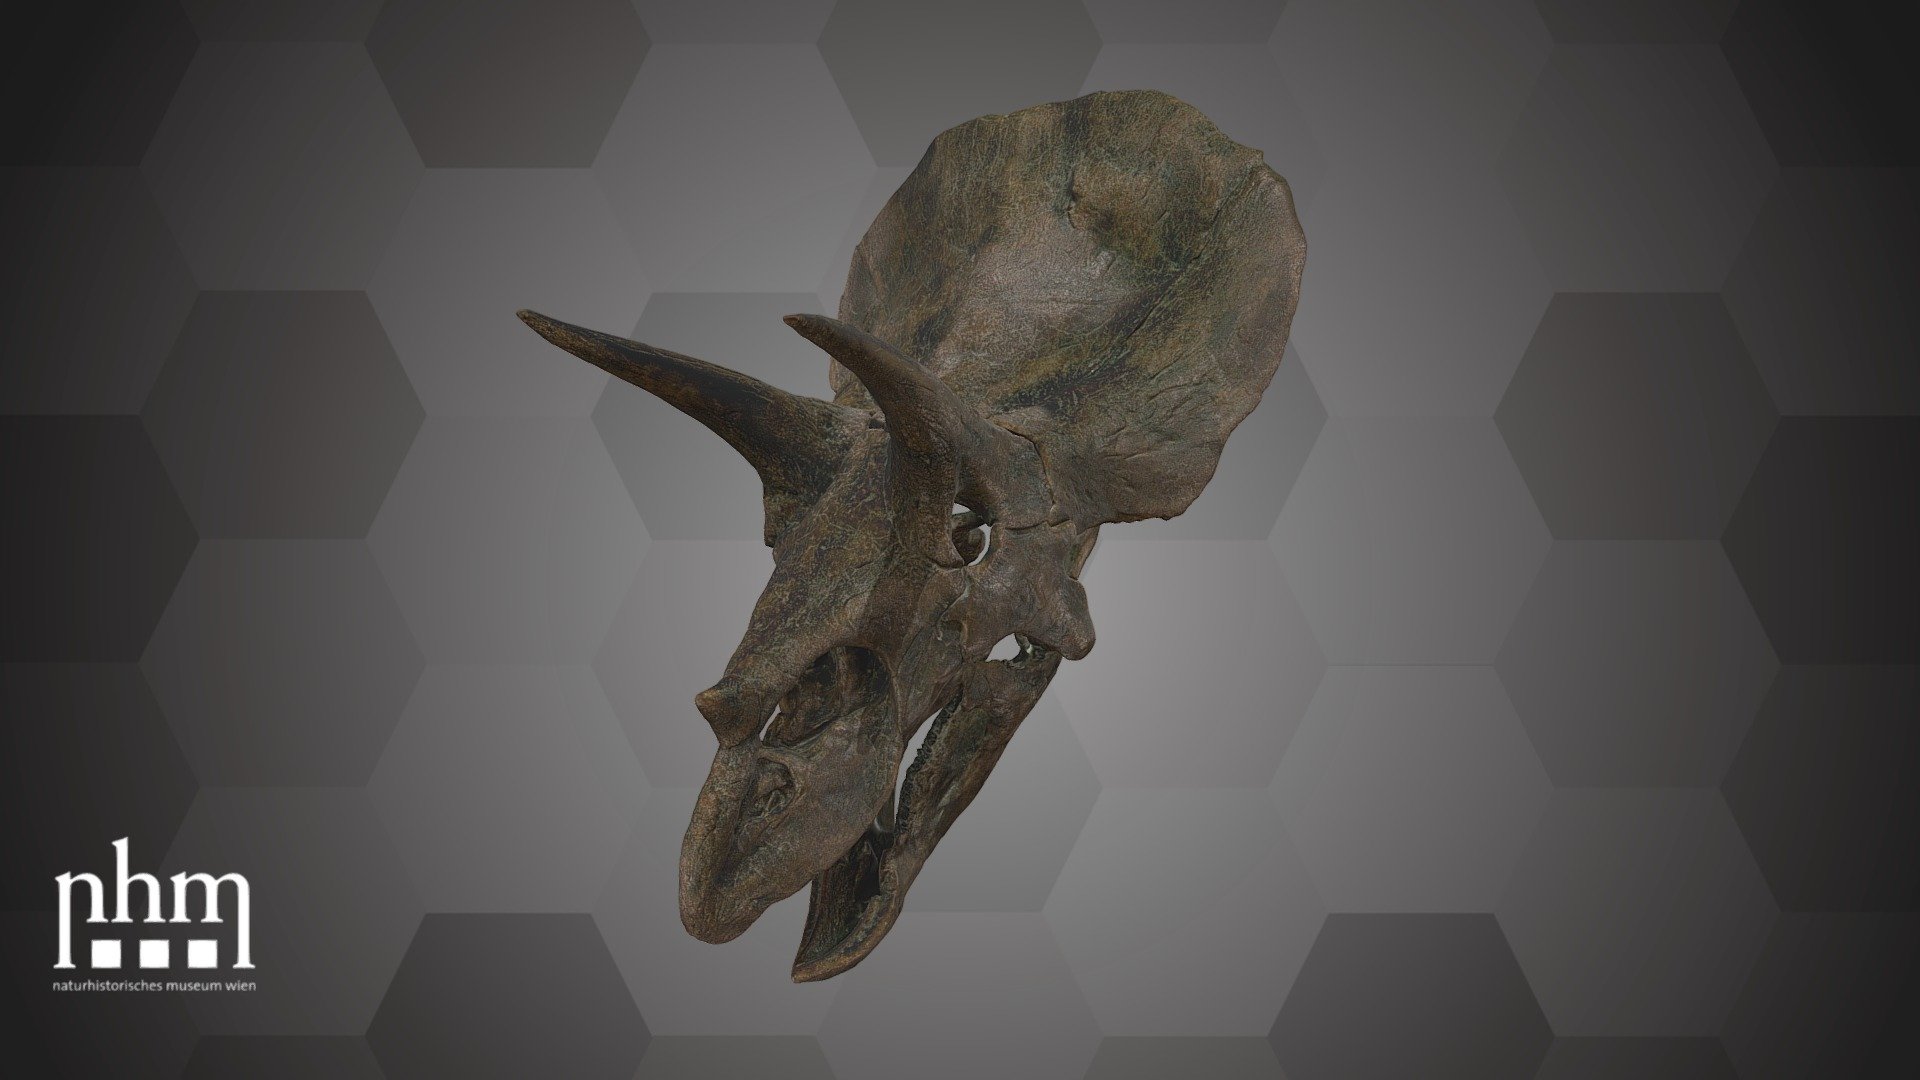 3D scan of a skull cast of the three-horned dinosaur Triceratops horridus. Triceratops lived during the latest Cretaceous in what is now North America. It was one of the largest horned dinosaurs and could reach a weight up to 10 tons. Its skull alone could grow over 2 meters in length! The name Triceratops is derived from the Greek words trí- (τρί-) meaning &lsquo;three', kéras (κέρας) meaning &lsquo;horn', and ṓps (ὤψ) meaning &lsquo;face'.

This cast of the Triceratops horridus skull can be found in Hall 10 of the NHM Vienna next to the T. rex skull. 

Species: Triceratops horridus (Marsh, 1889)

Inventory number: NHMW-Geo 2000z0185/0001

Collection: Natural History Museum Vienna, Geology &amp; Paleontology Dept., Vertebrate Coll. (curator: Ursula Göhlich)

Find out more about the NHMW here.

Scanned and edited by Nikola Brodtmann &amp; Viola Winkler (NHMW)

Scanner: Artec Leo. Infrastructure funded by the FFG 3d model